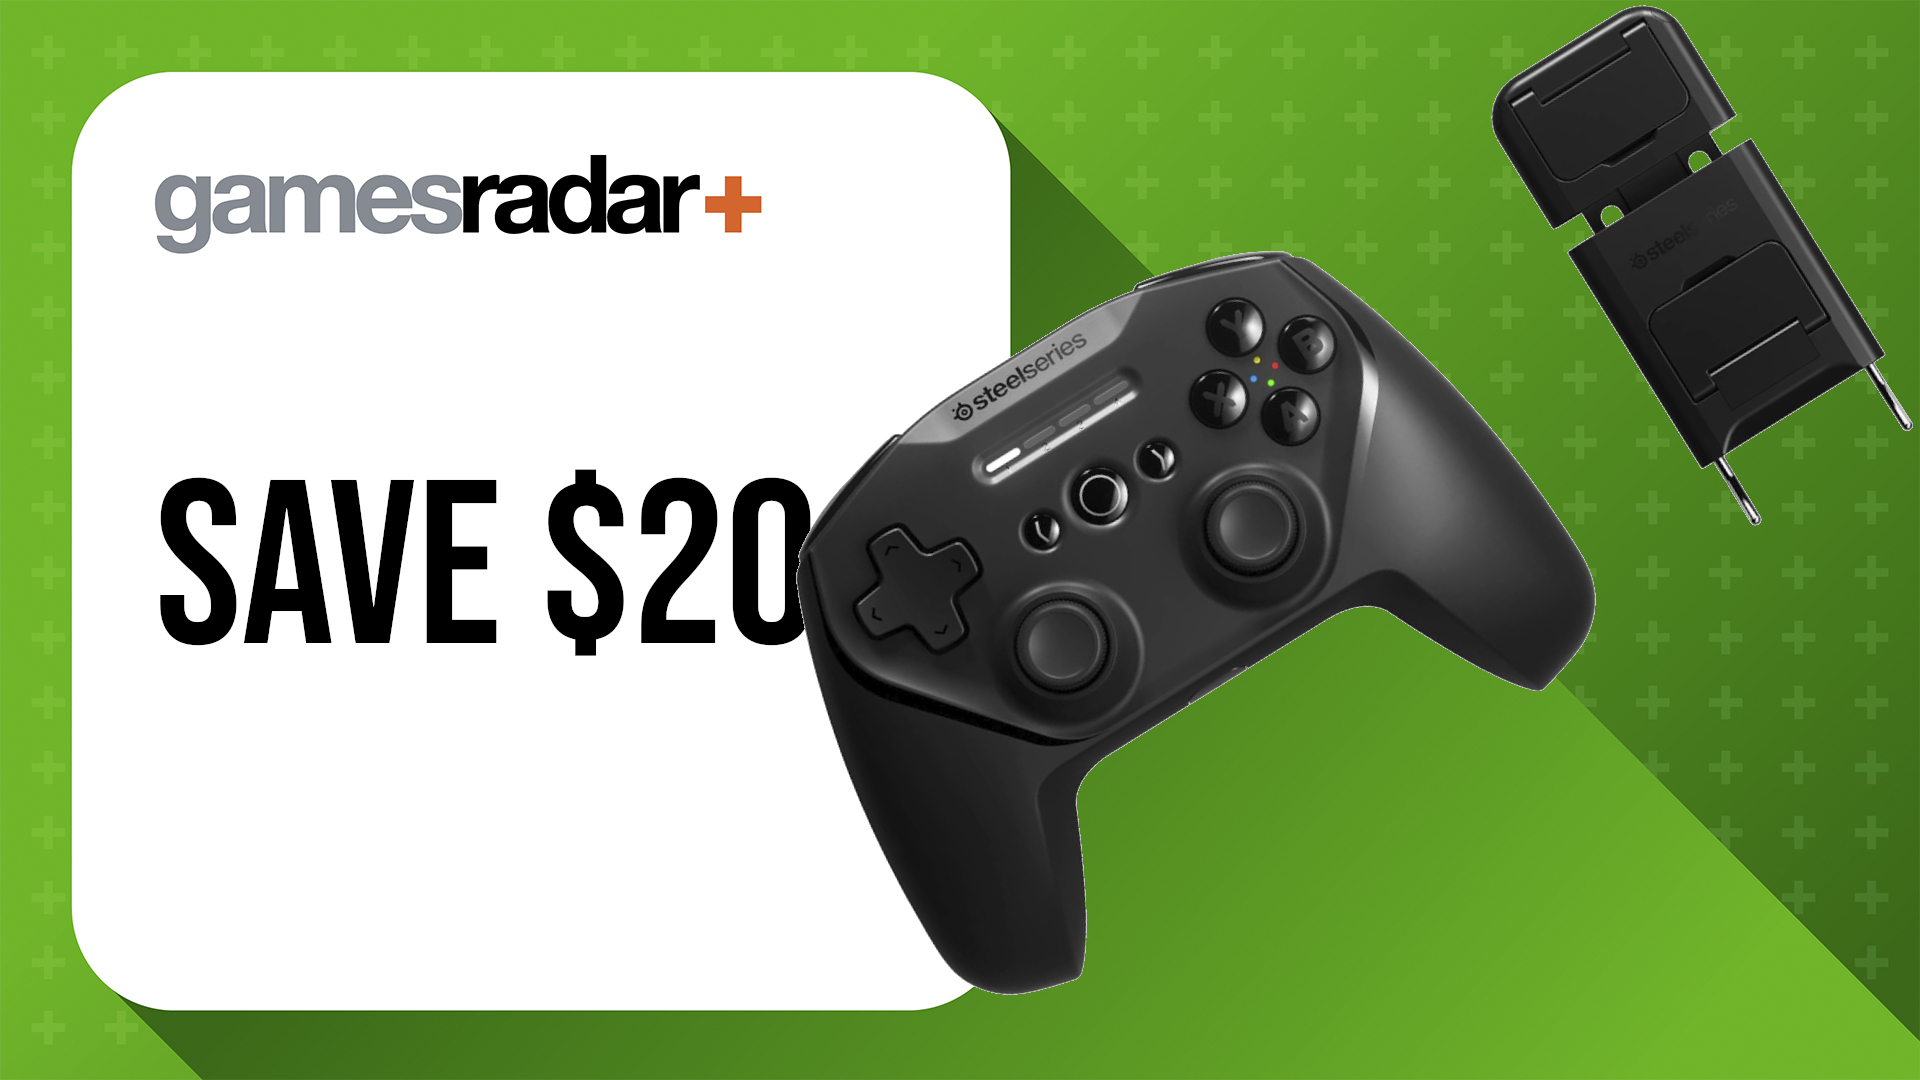 Amazon Prime Day Xbox sales with SteelSeries Stratus controller and phone holder